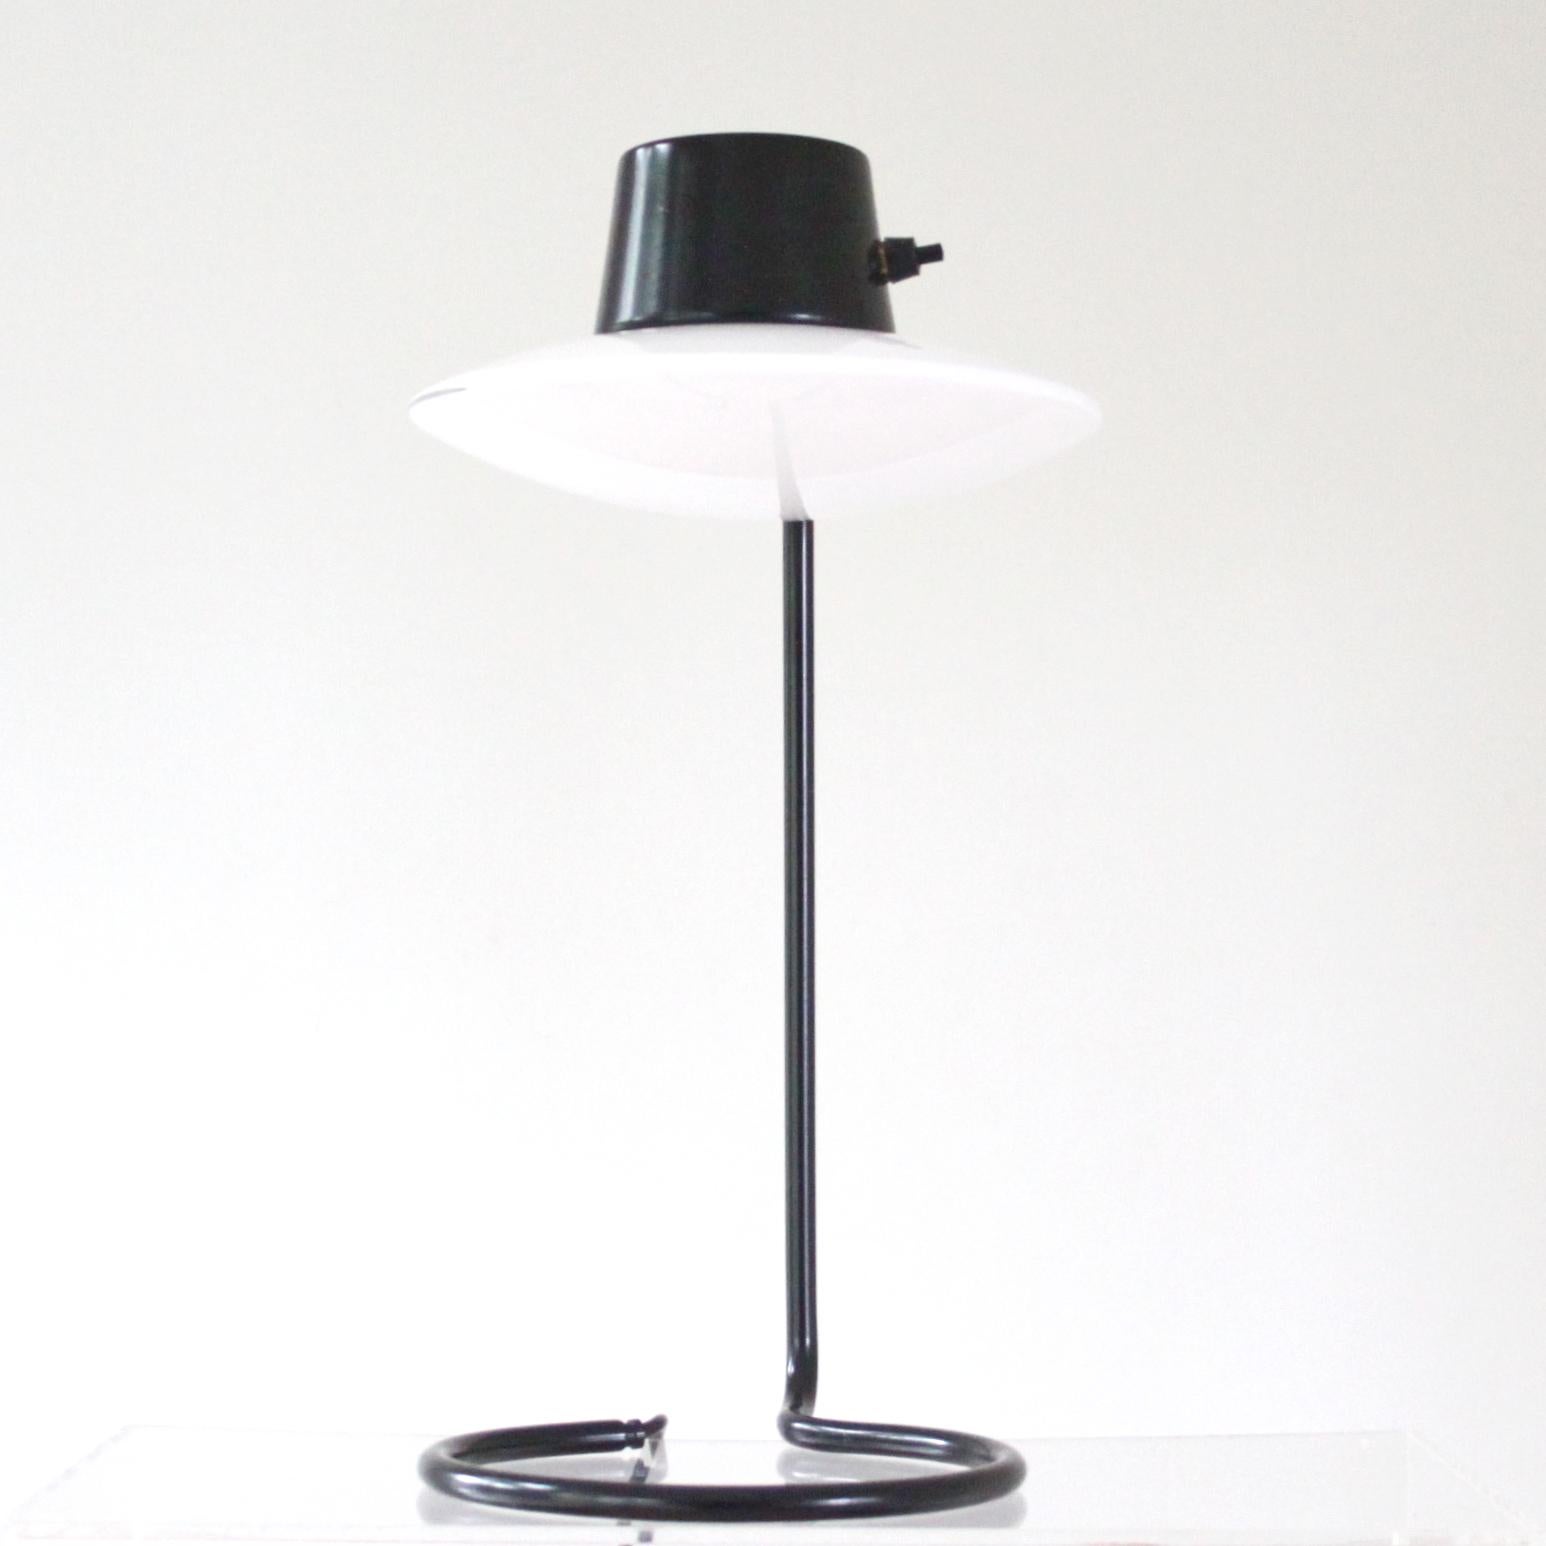 ARNE JACOBSEN & LOUIS POULSEN

SCANDINAVIAN MODERN

A beautiful vintage Arne Jacobsen Saint Catherine table lamp. 

This lamp is also called the Oxford Table Lamp, High model with black metal stem. Bakelit switch, opaque glass shade.

Designed for